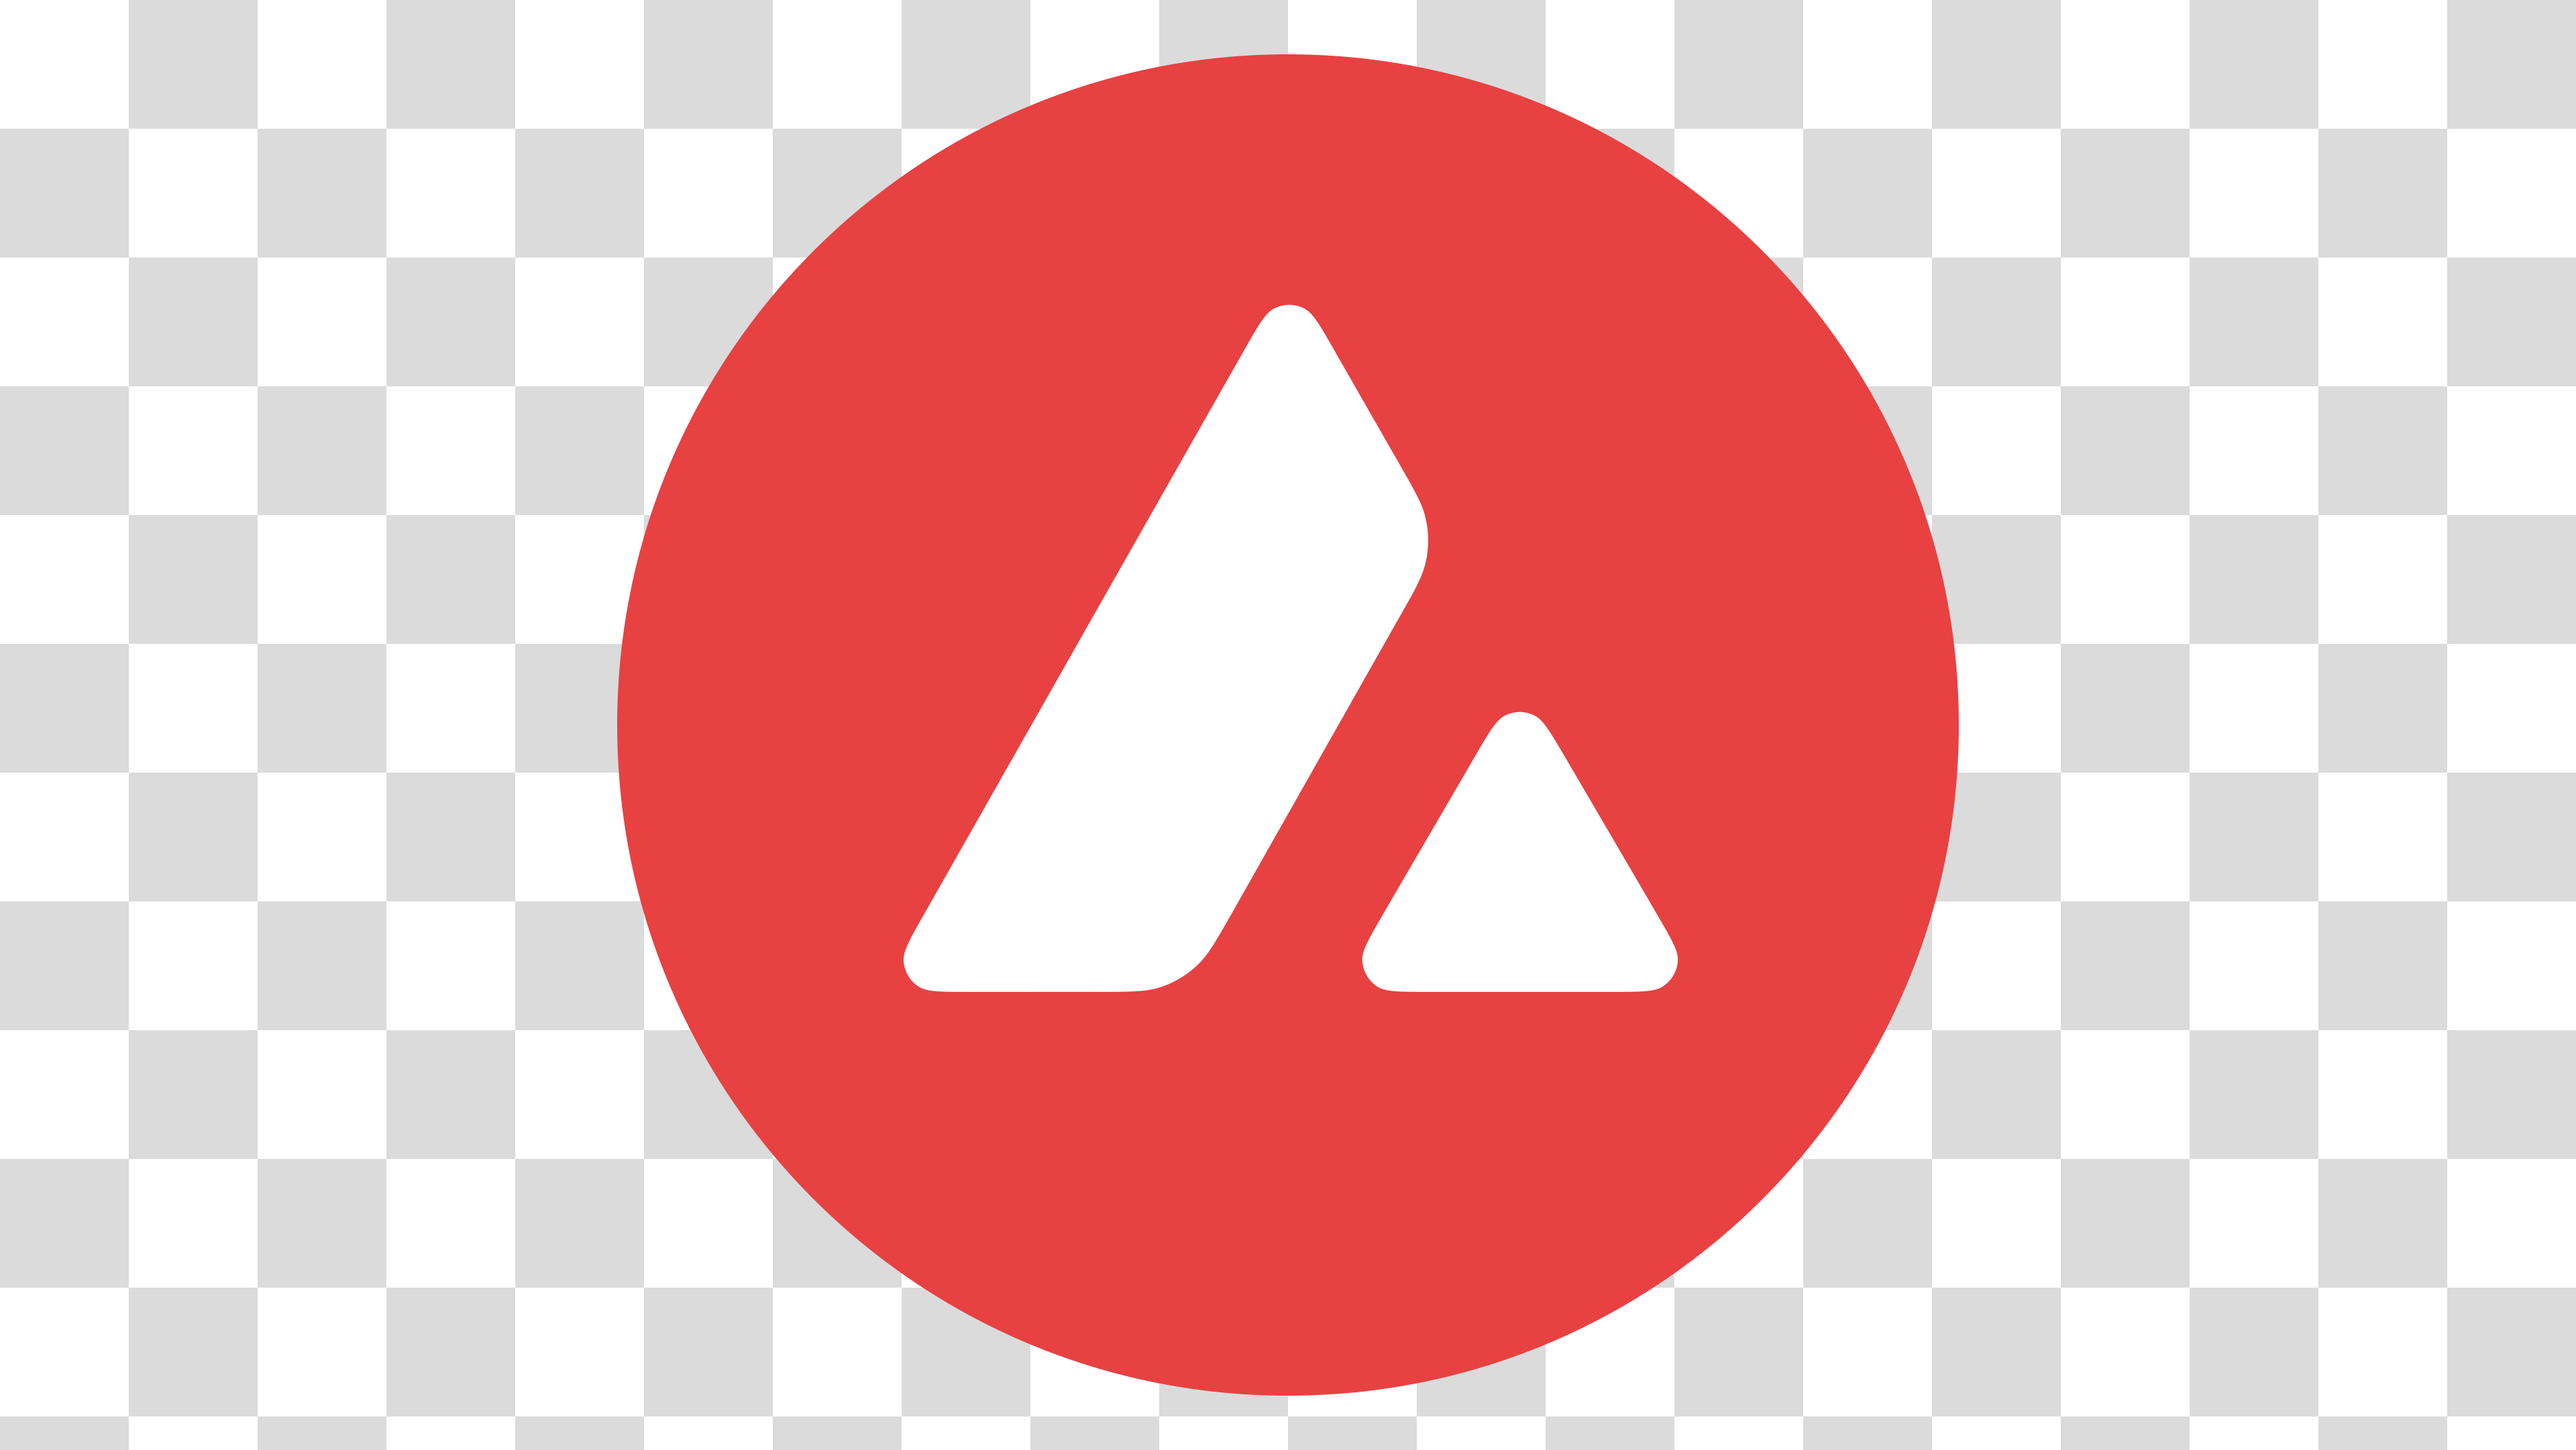 Avalanche (AVAX) Logo Icon PNG Transparent Image